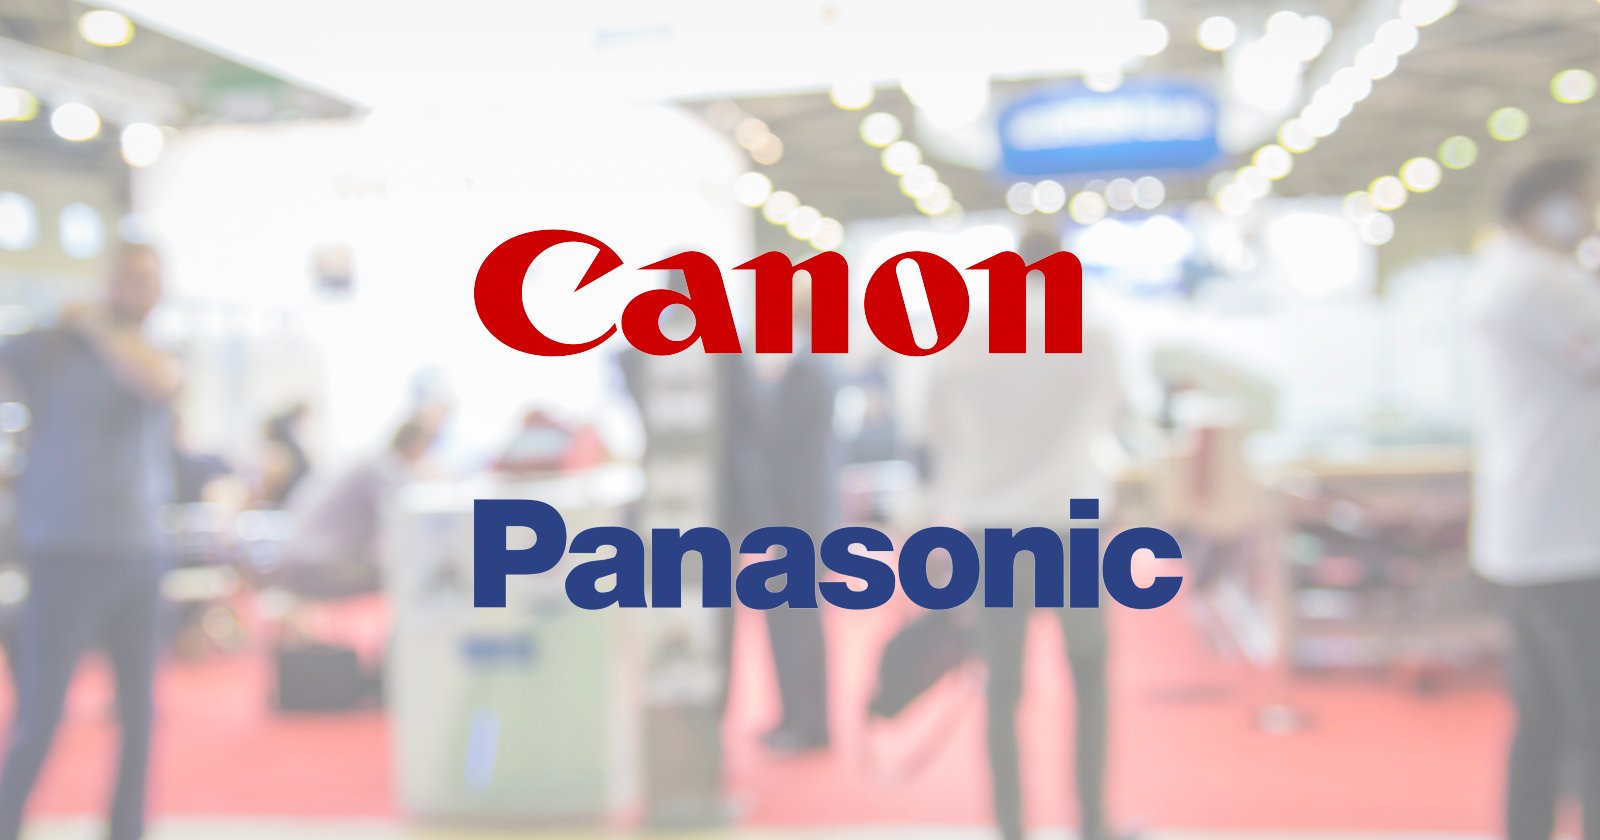 Canon-and-Panasonic-Drop-Out-of-NAB-Due-to-COVID-19-Concerns.jpg